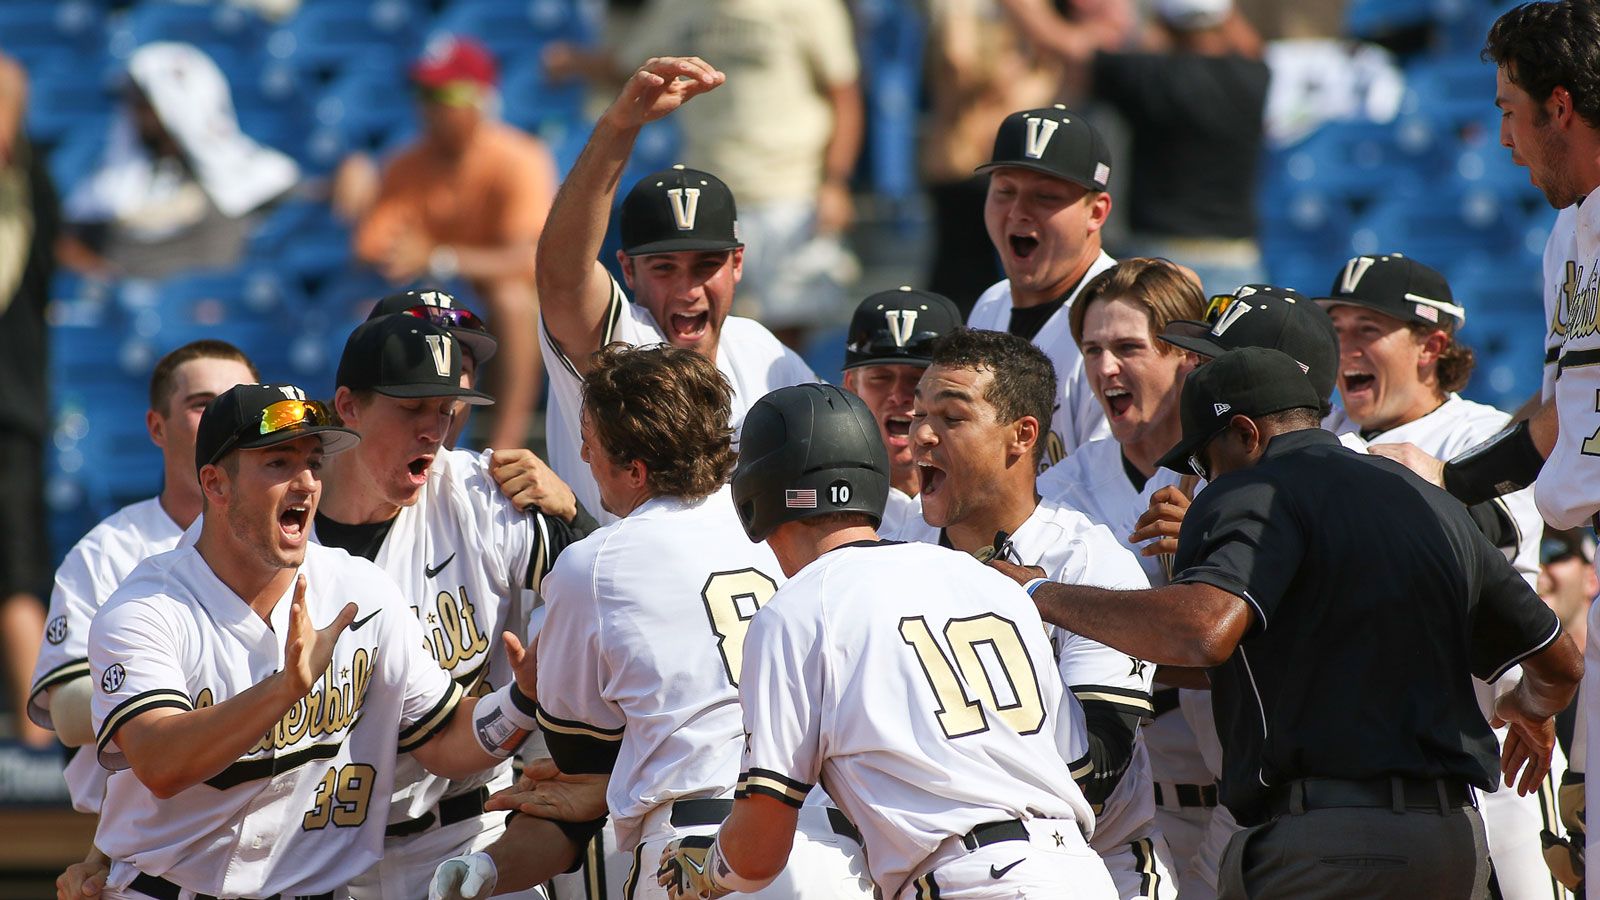 Relive Dansby Swanson's Vandy days on SEC Network